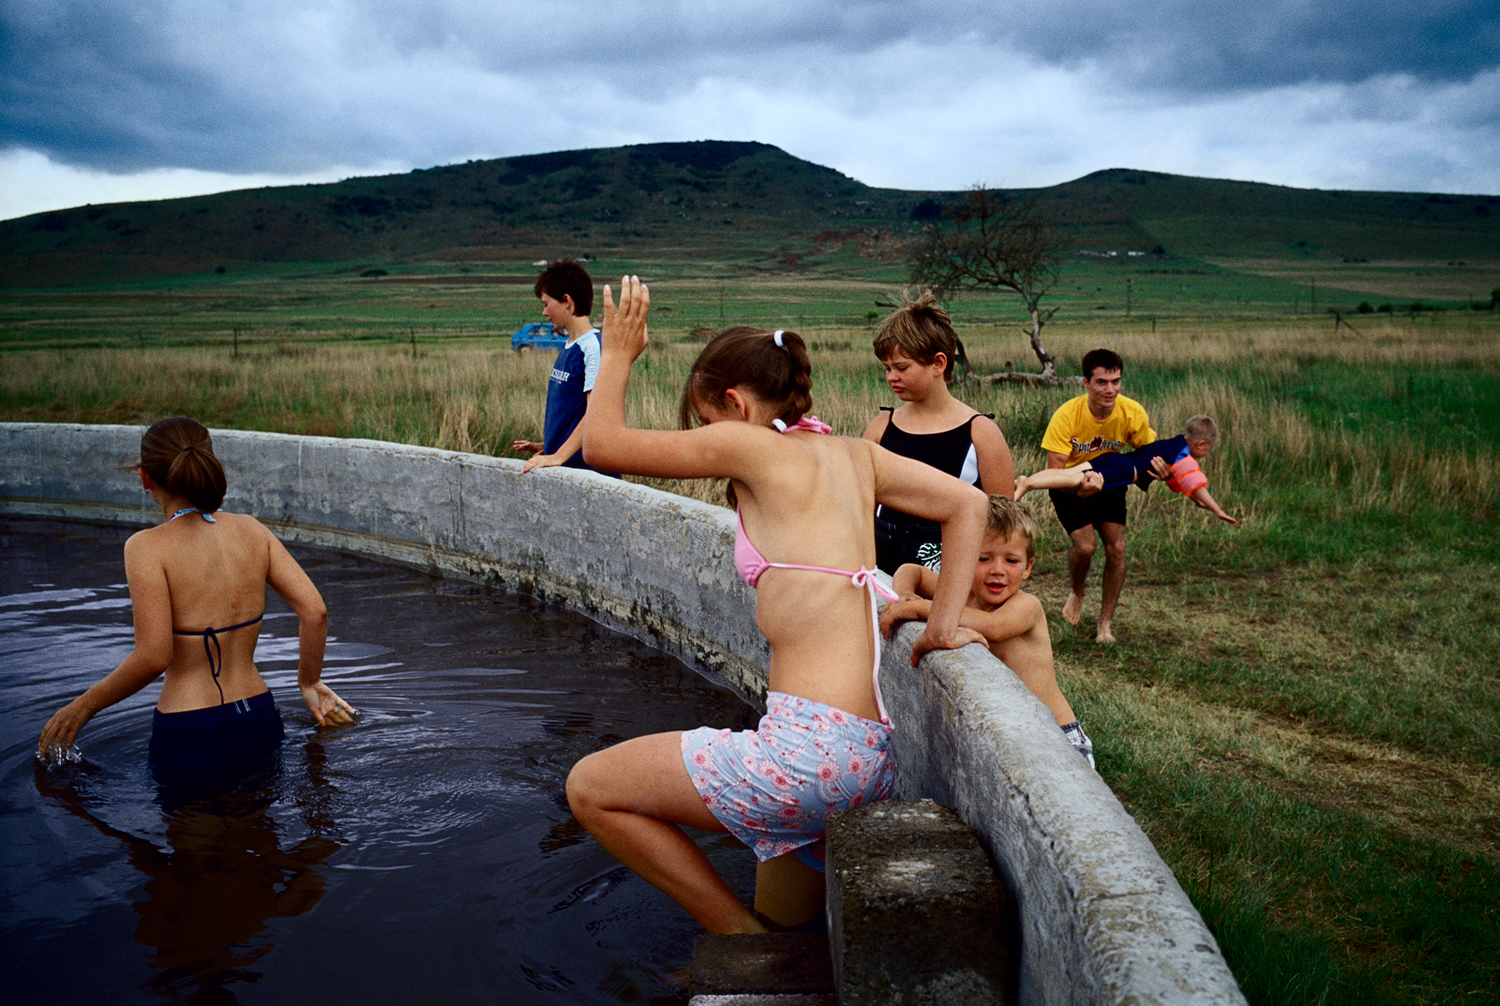 Youths bathing in a water cistern in a rural area in Blood River, Natal Province, South Africa after celebrating the battle of Blood River, December 2004. Held annually on December 16th,  the anniversary is the most important holiday in the Afrikaner calendar.